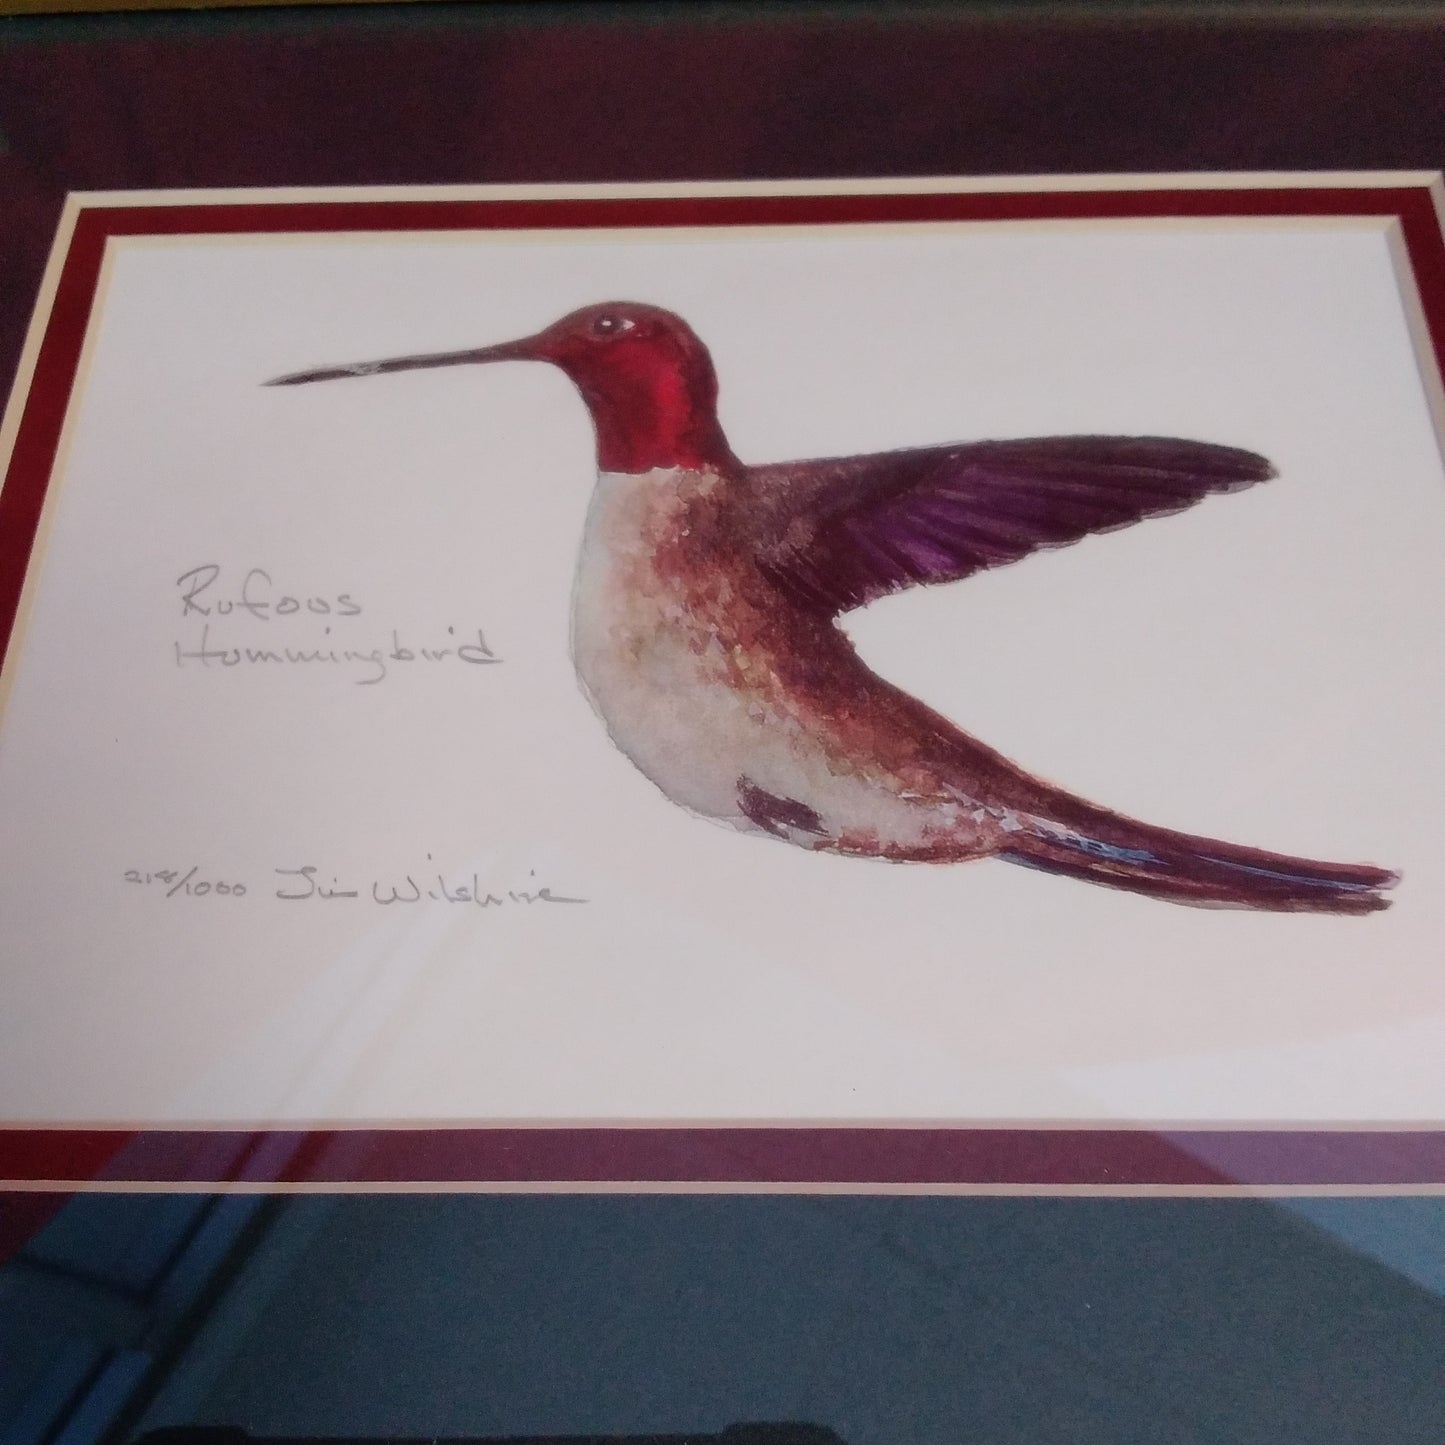 Lot of 4 Framed Signed and Numbered Hummingbird Prints by Jim Wilshire